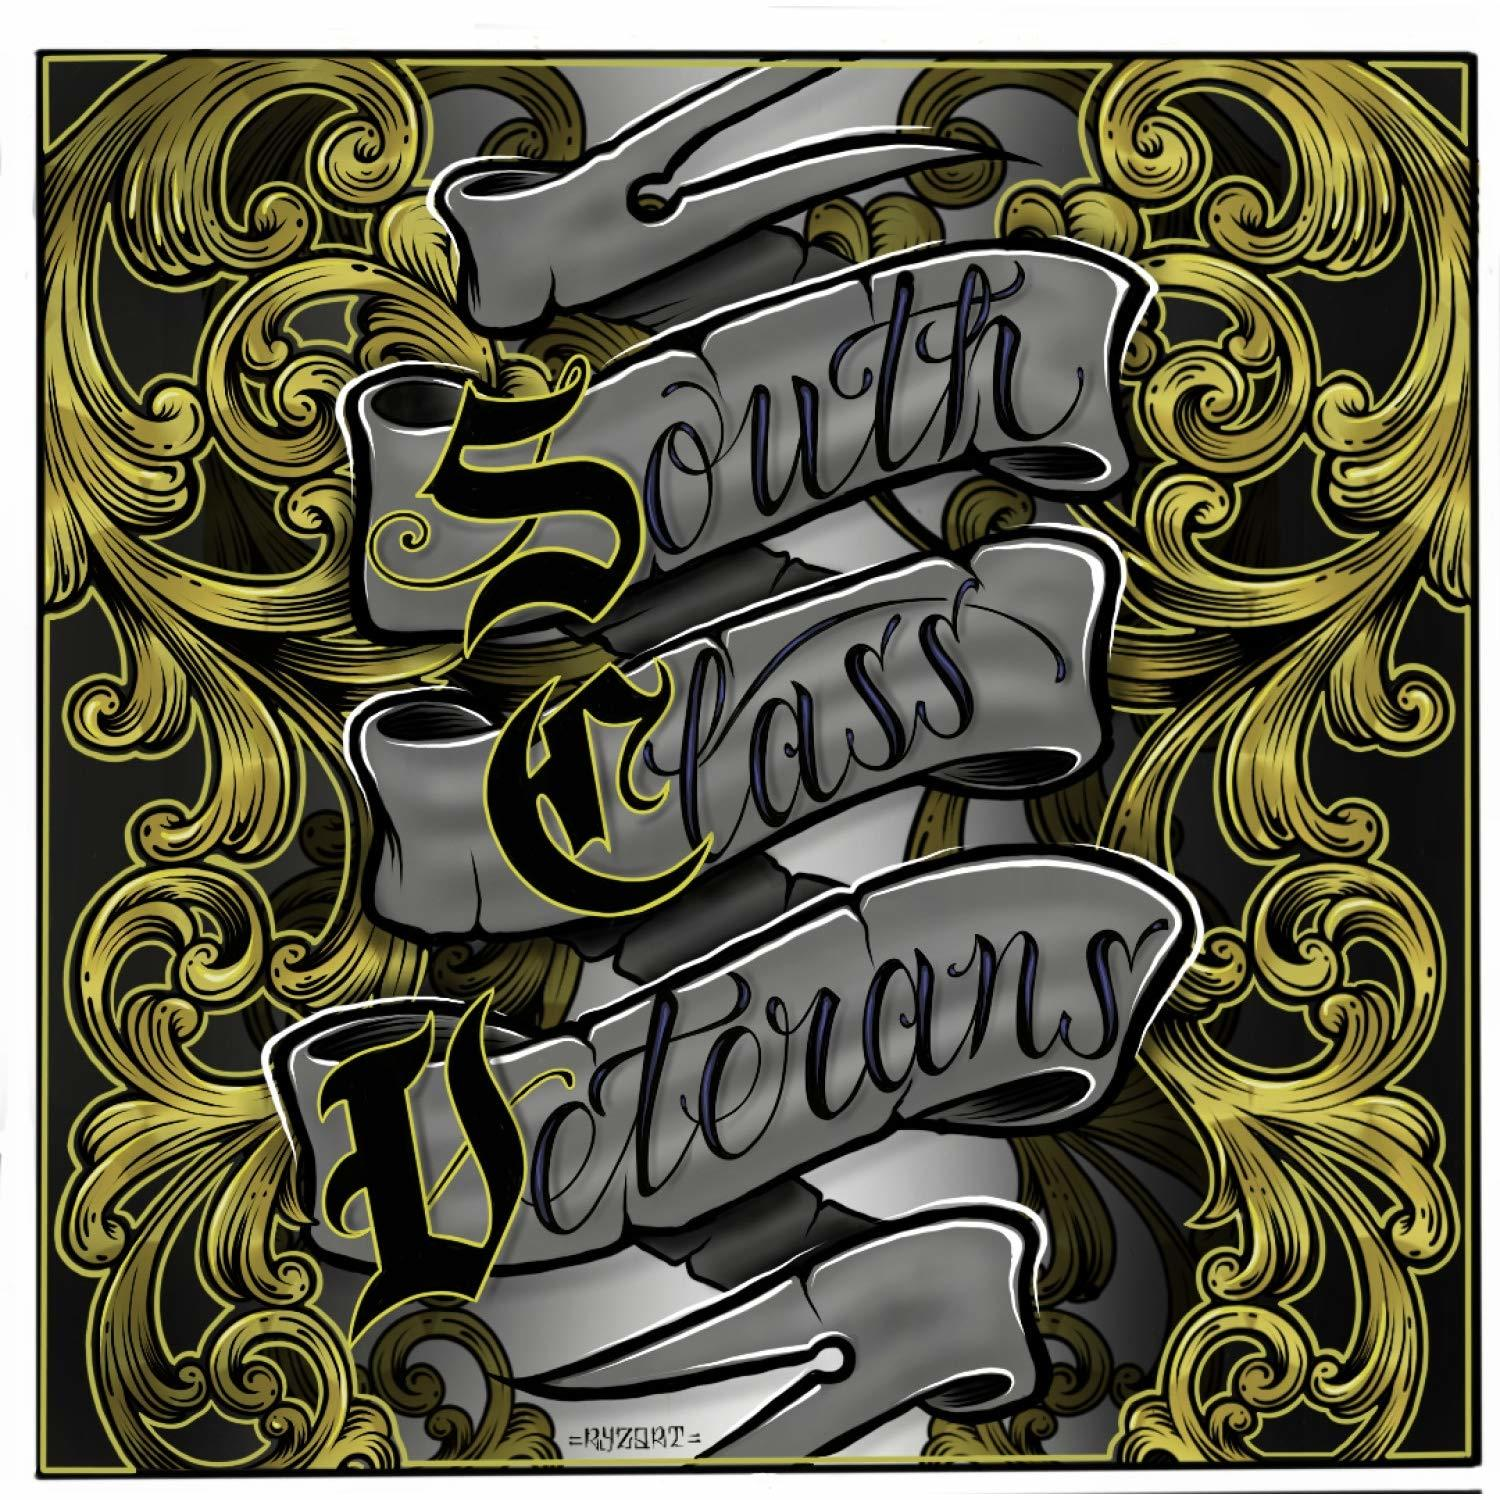 South Class Veterans - To (CD) Hell Pay 